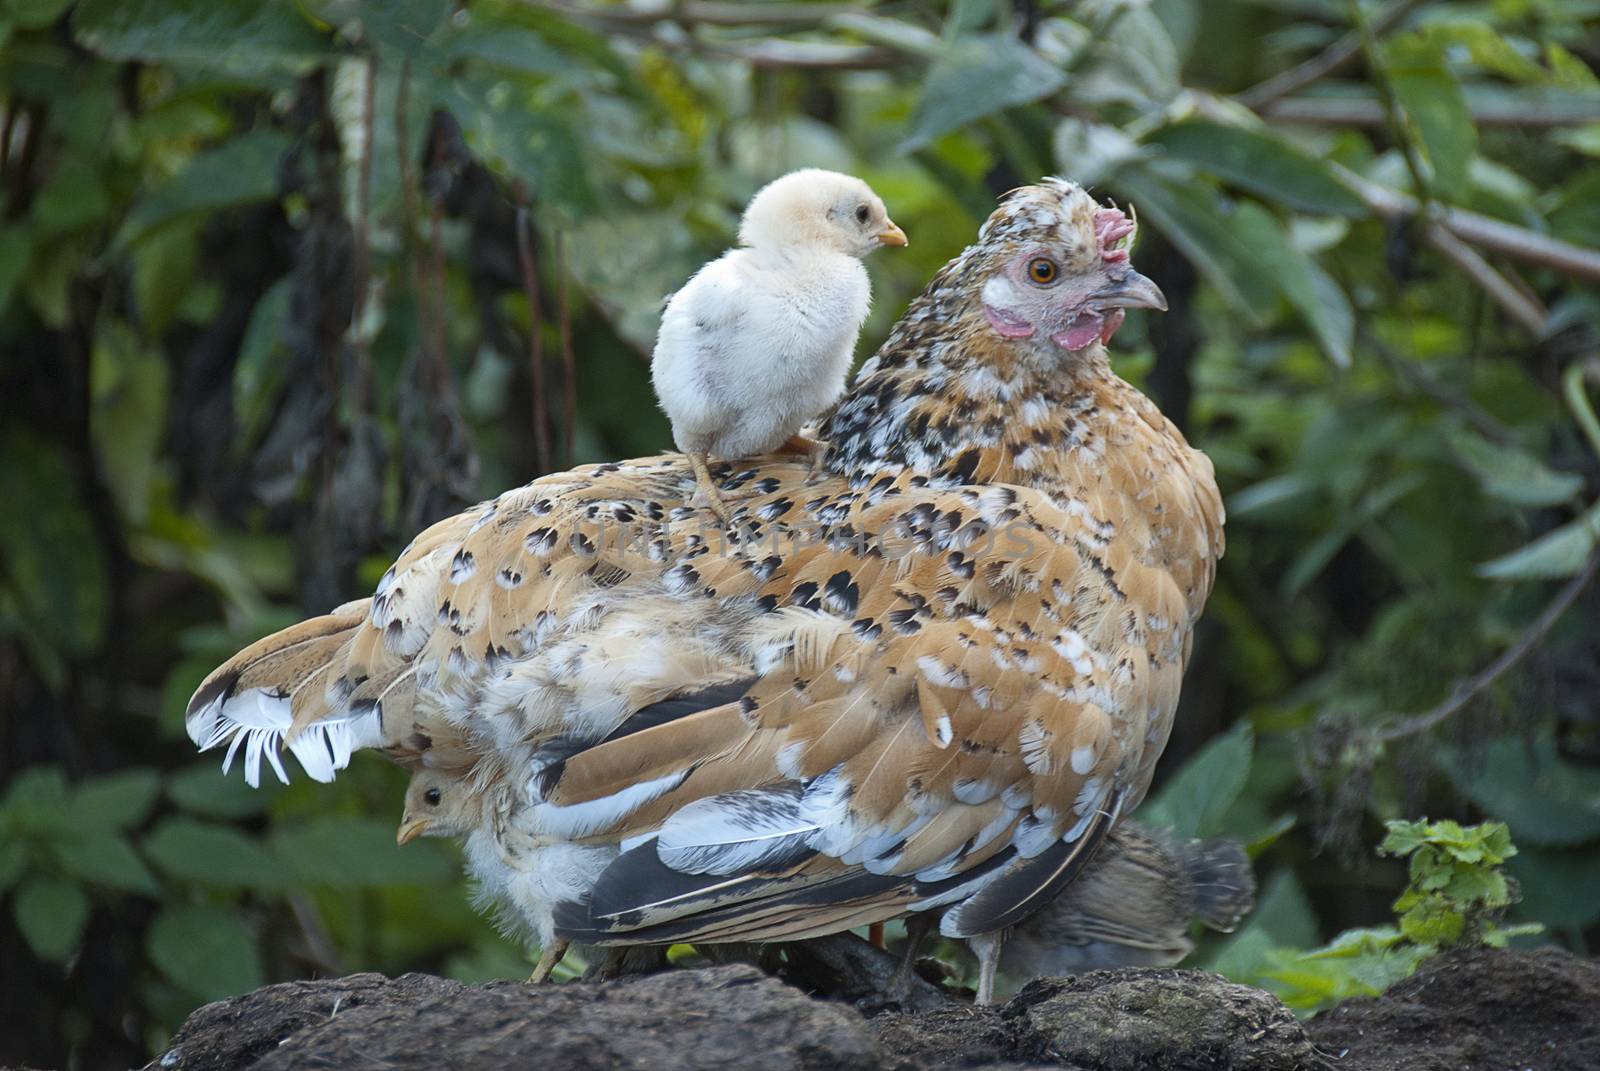 Hen with her chicks, protecting herself under her mother's feathers